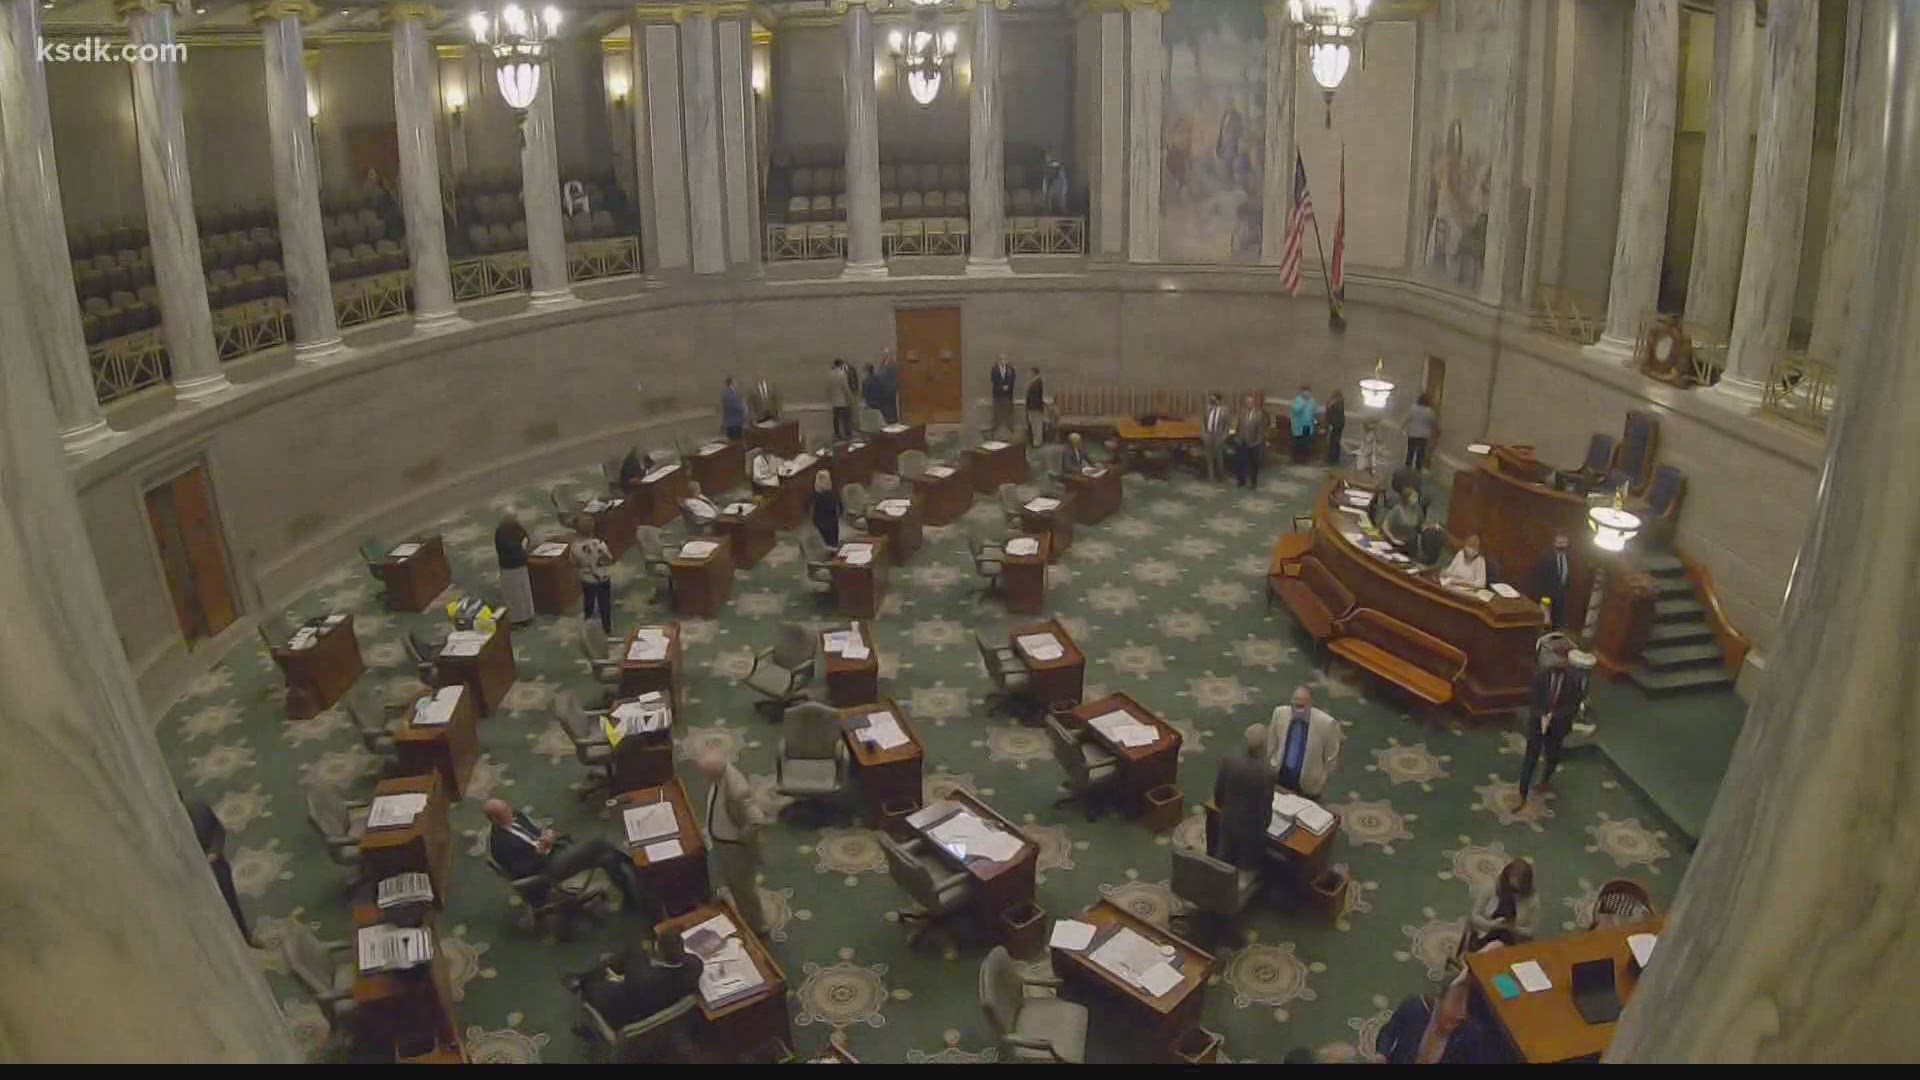 After 17 hours of deliberation, Missouri state senators wrapped up debate and passed several crime bills.